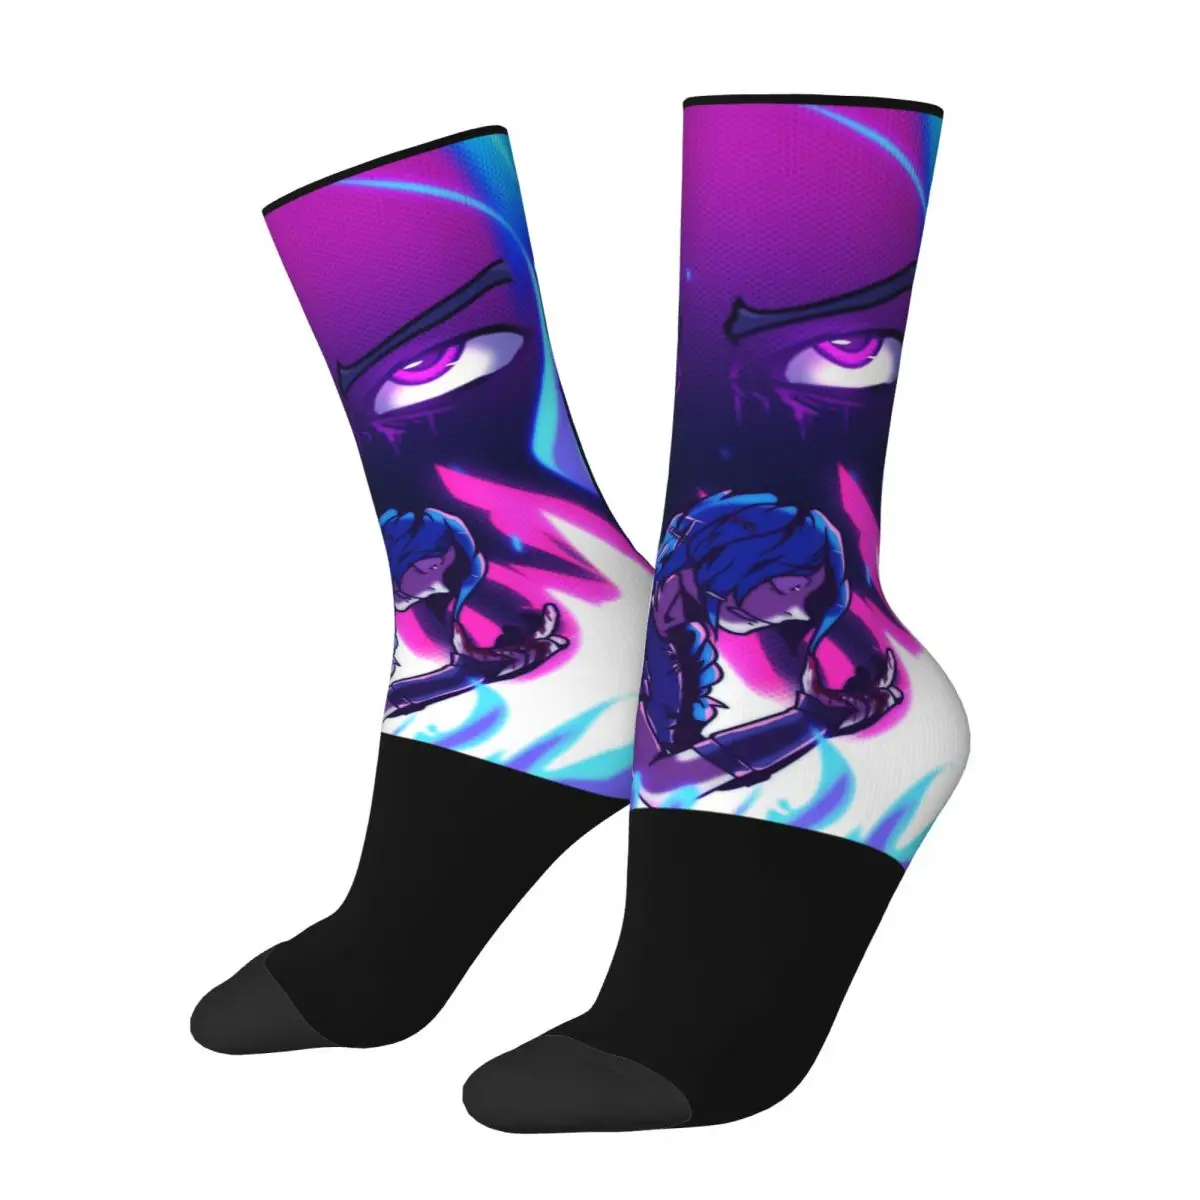 

Happy Funny Men's Socks Angry Eyes Vintage Harajuku Arcane League of Legends LOL Anime Casual Crew Crazy Sock Gift Printed